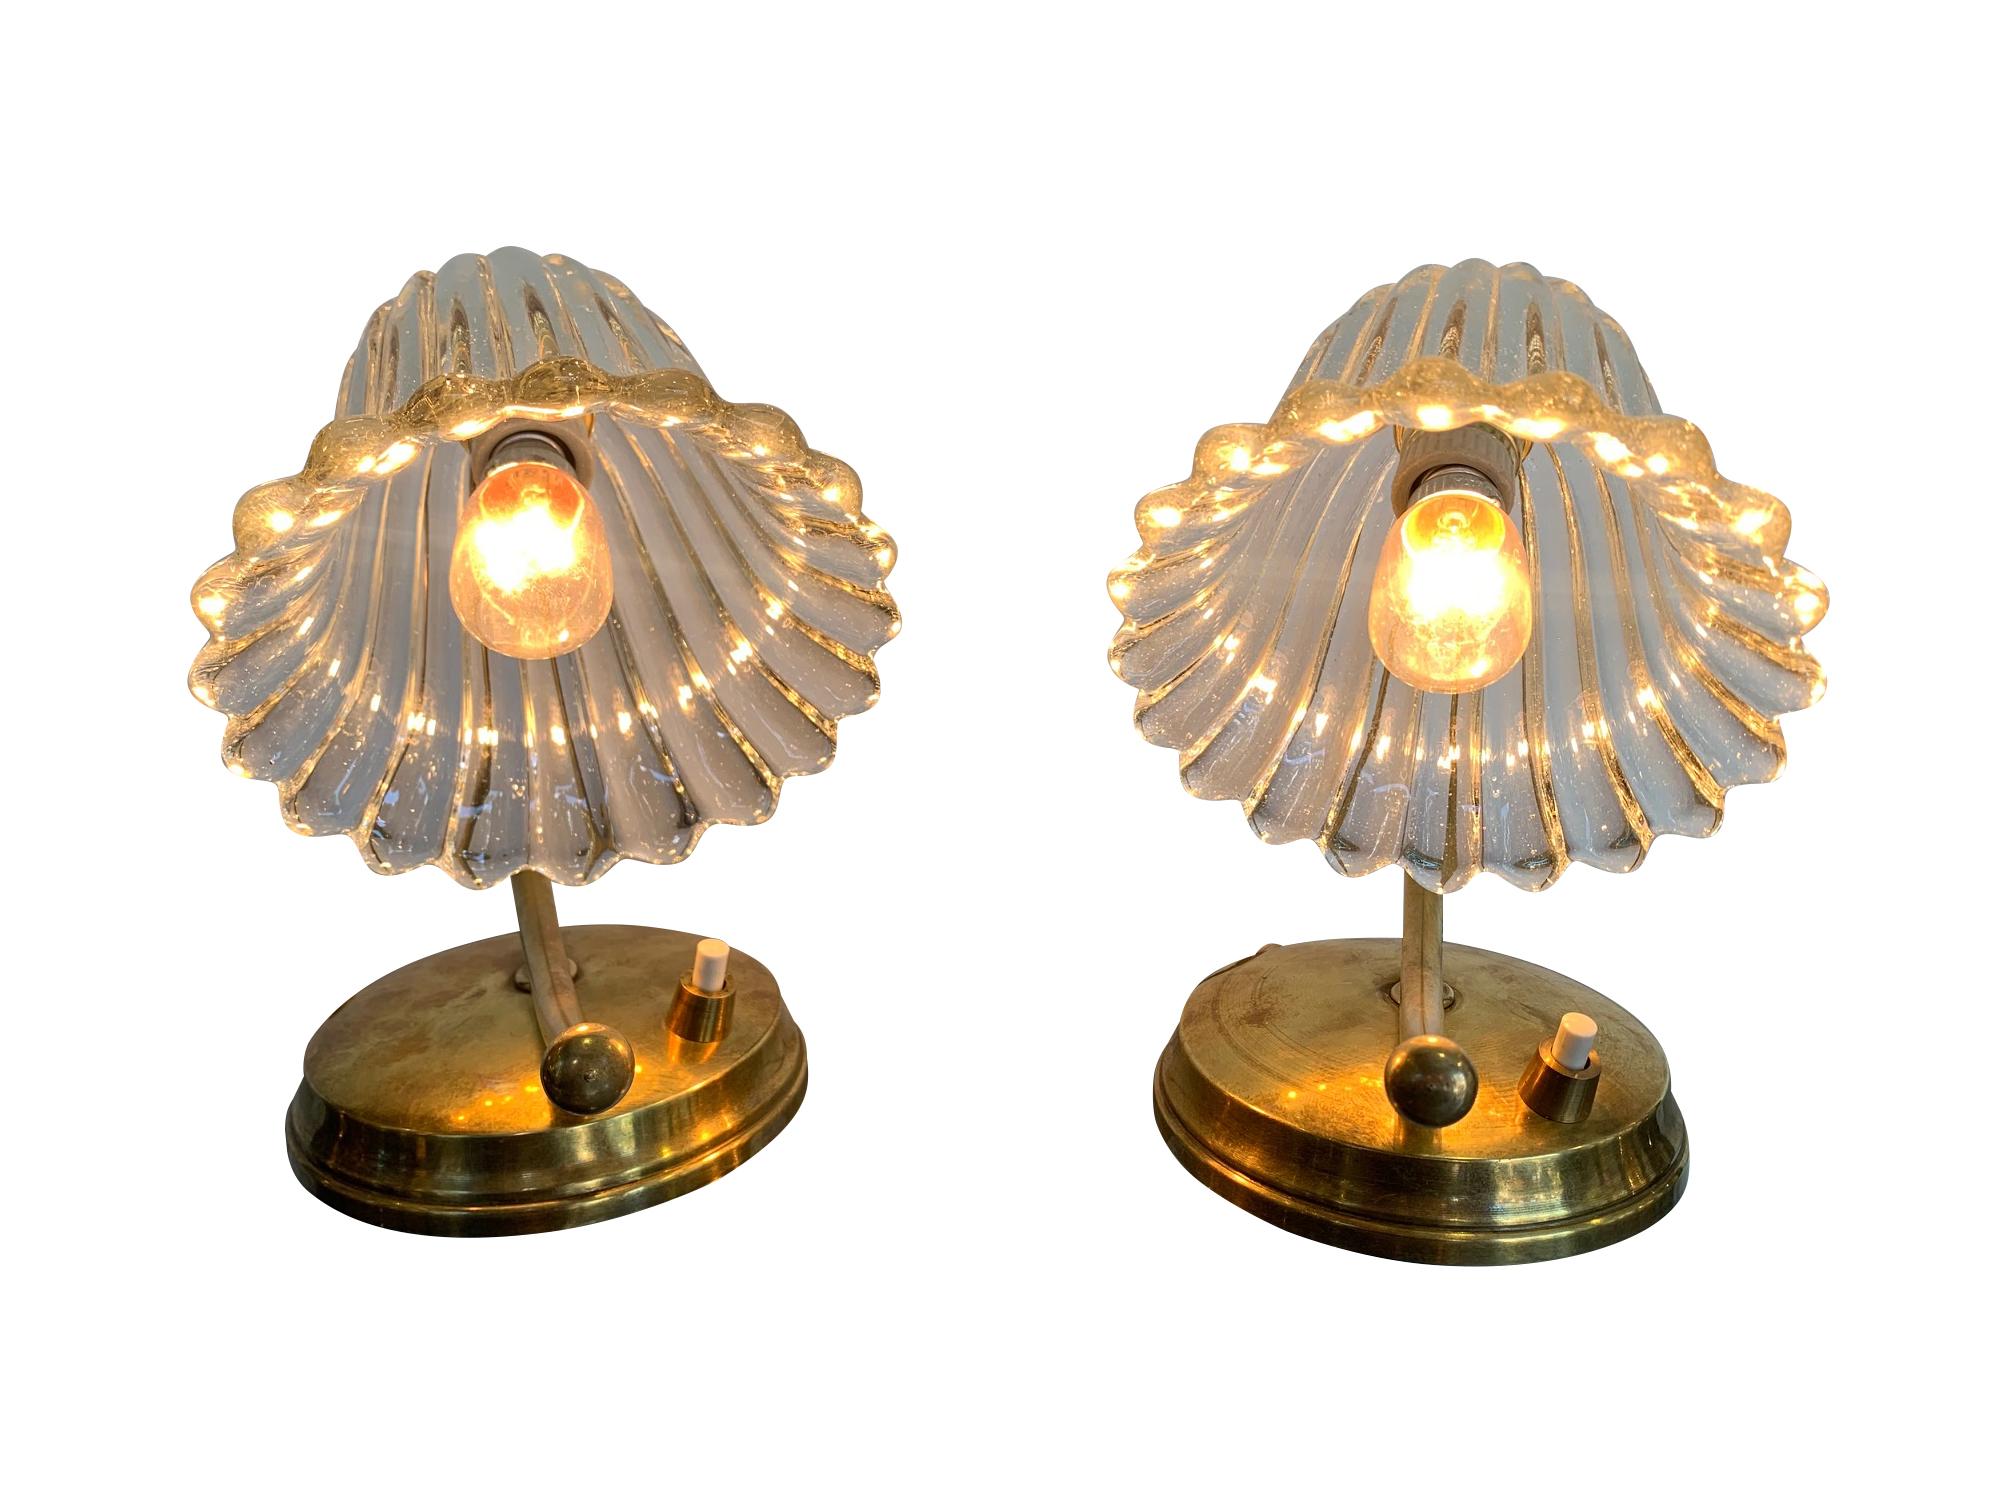 A pair of lovely 1960s Barovier style Italian lamps with glass flower shaped shades and brass base with a hinged arm on the shade. These lamps could be used as table lamps or wall lamp. Re wired with antique gold flex and PAT tested.